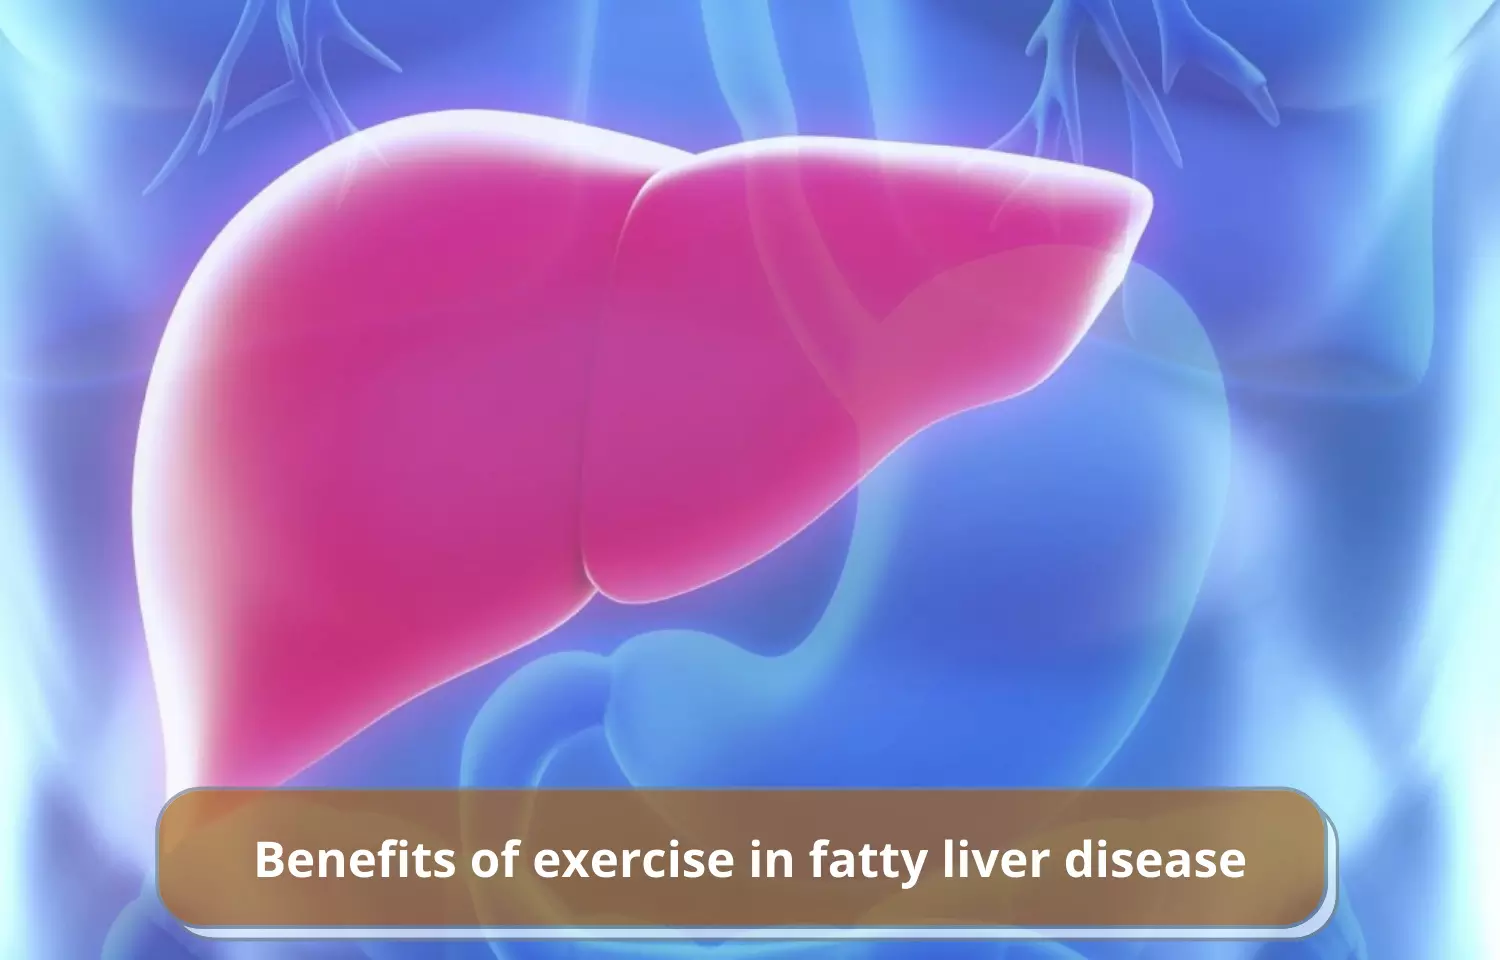 Journal Club - Benefits of exercise in fatty liver disease